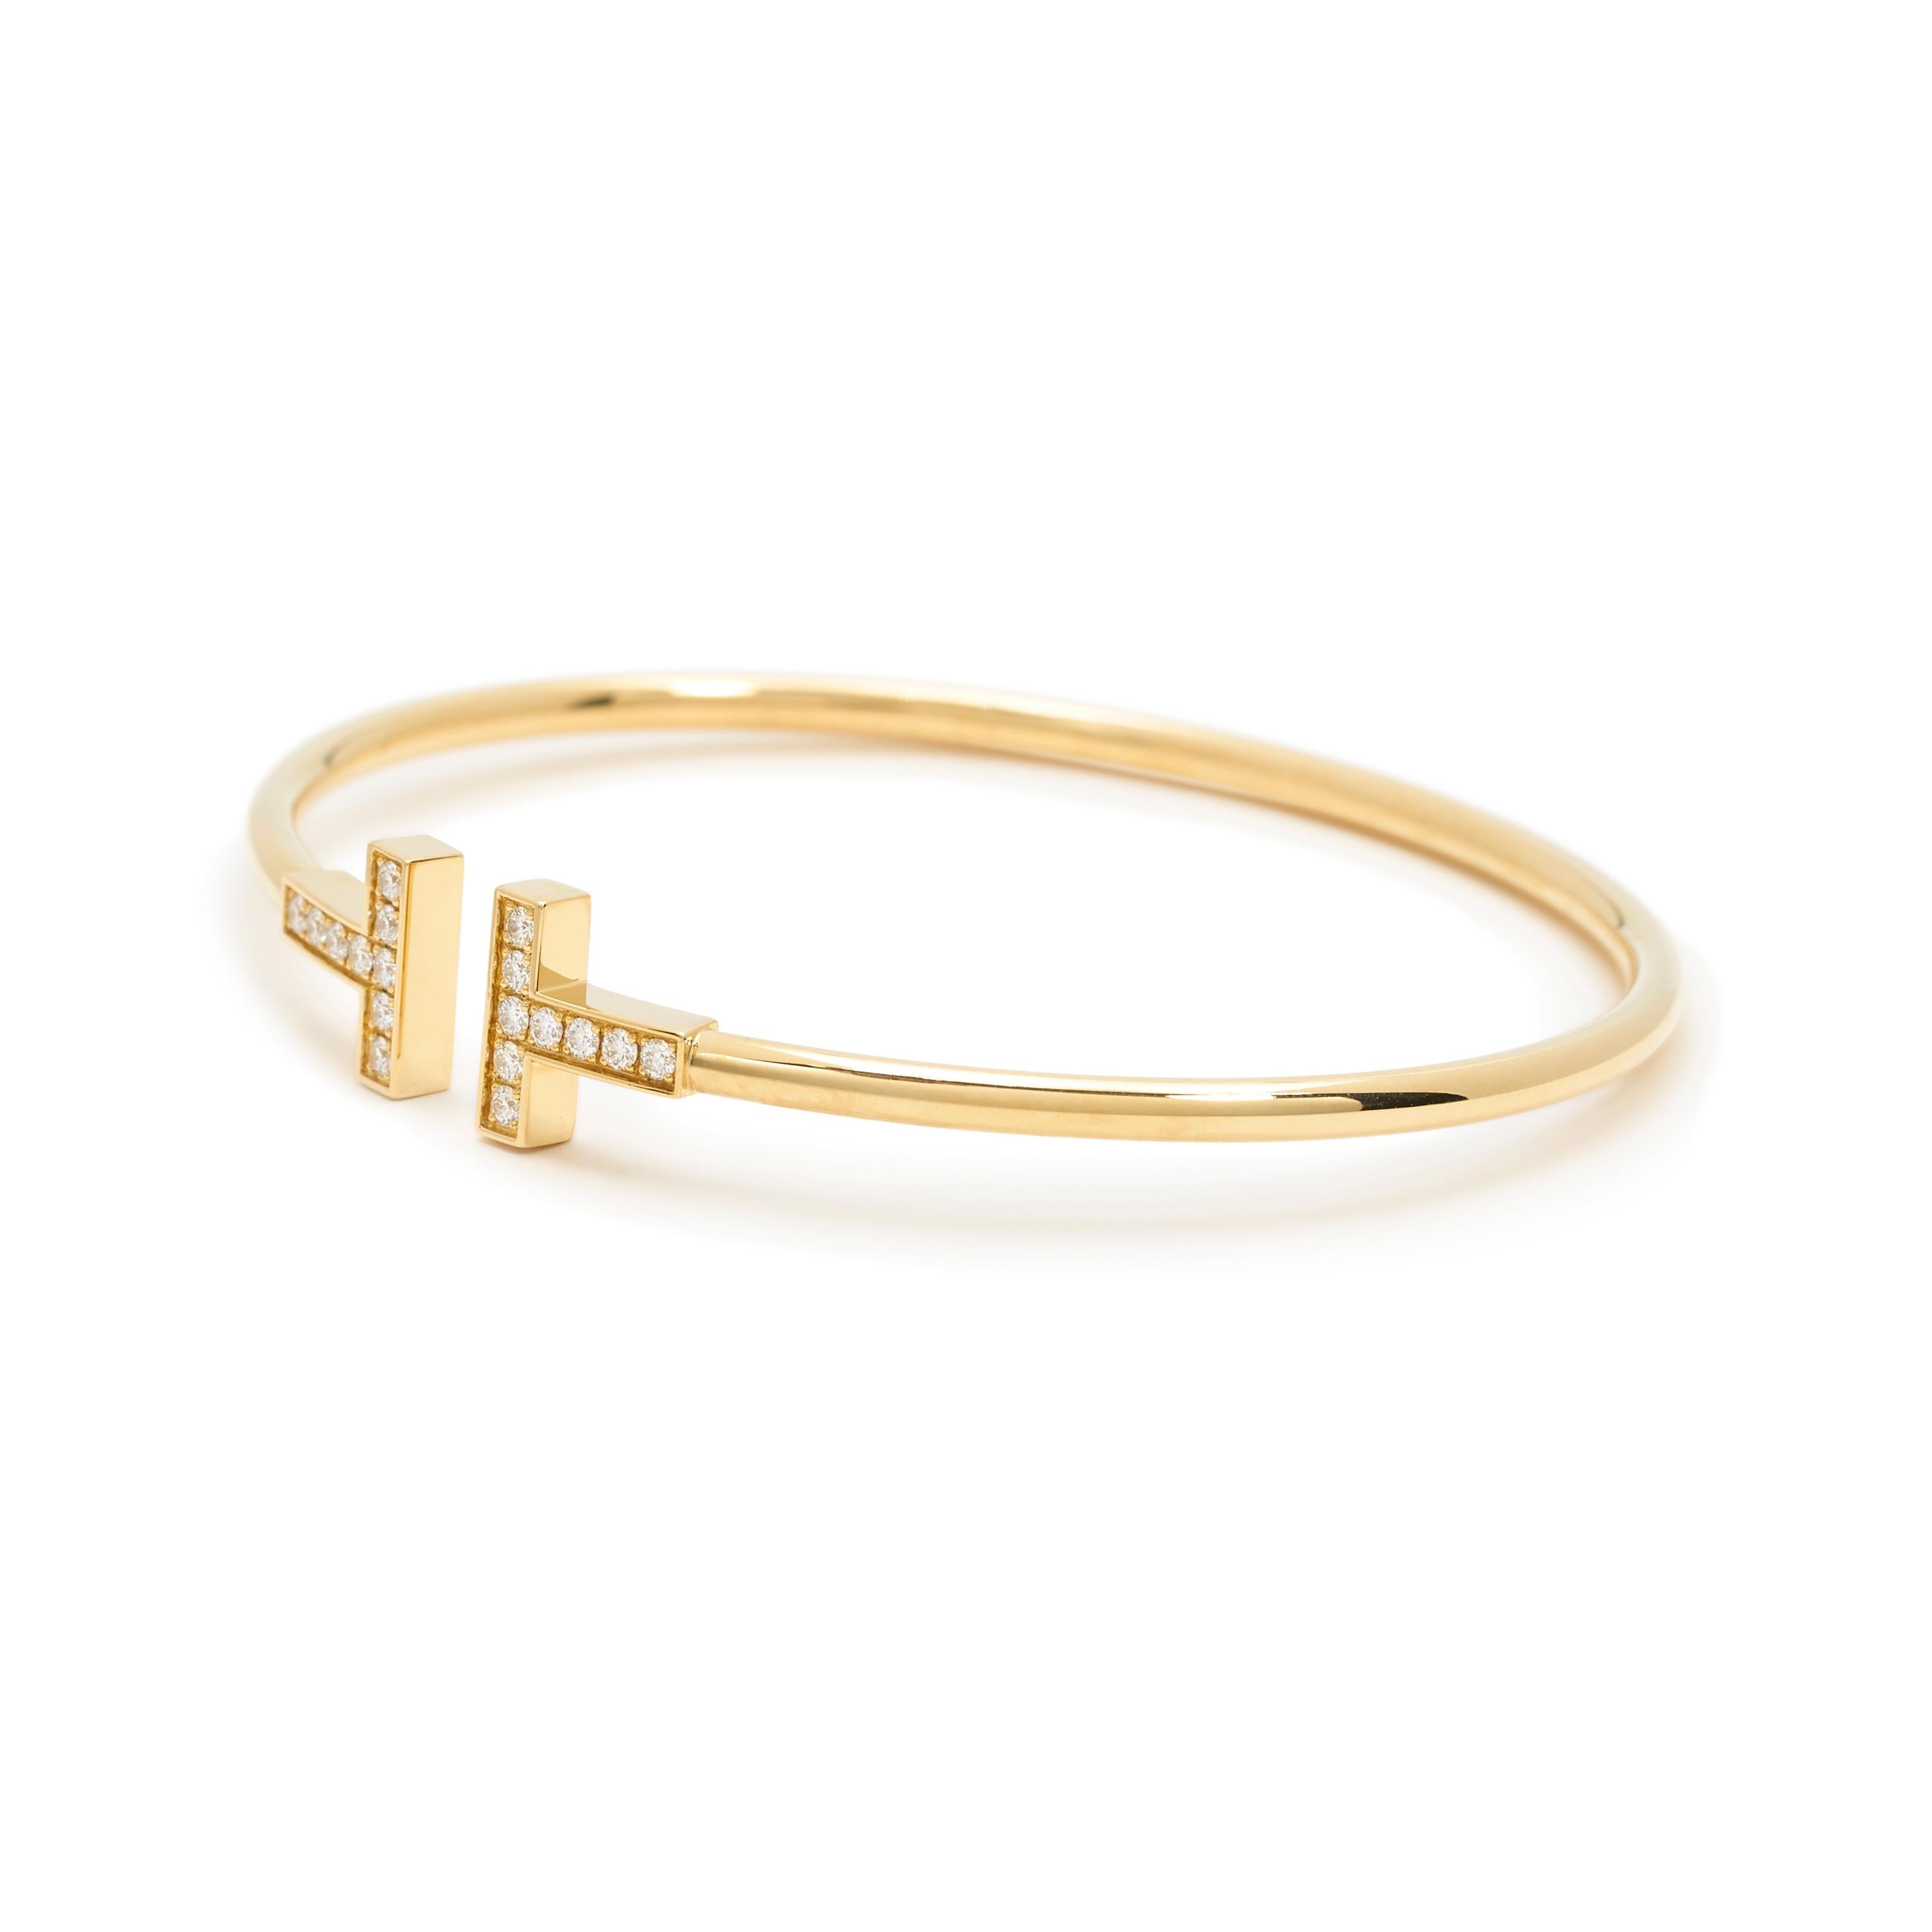 Authentic Tiffany & Co. wire bracelet from the Tiffany T collection crafted in 18 karat yellow gold with 18 diamonds weighing an estimated .22 carats. Size small, can fit up to a size 5 3/4 inch wrist. Inspired by the strong, clean lines of the